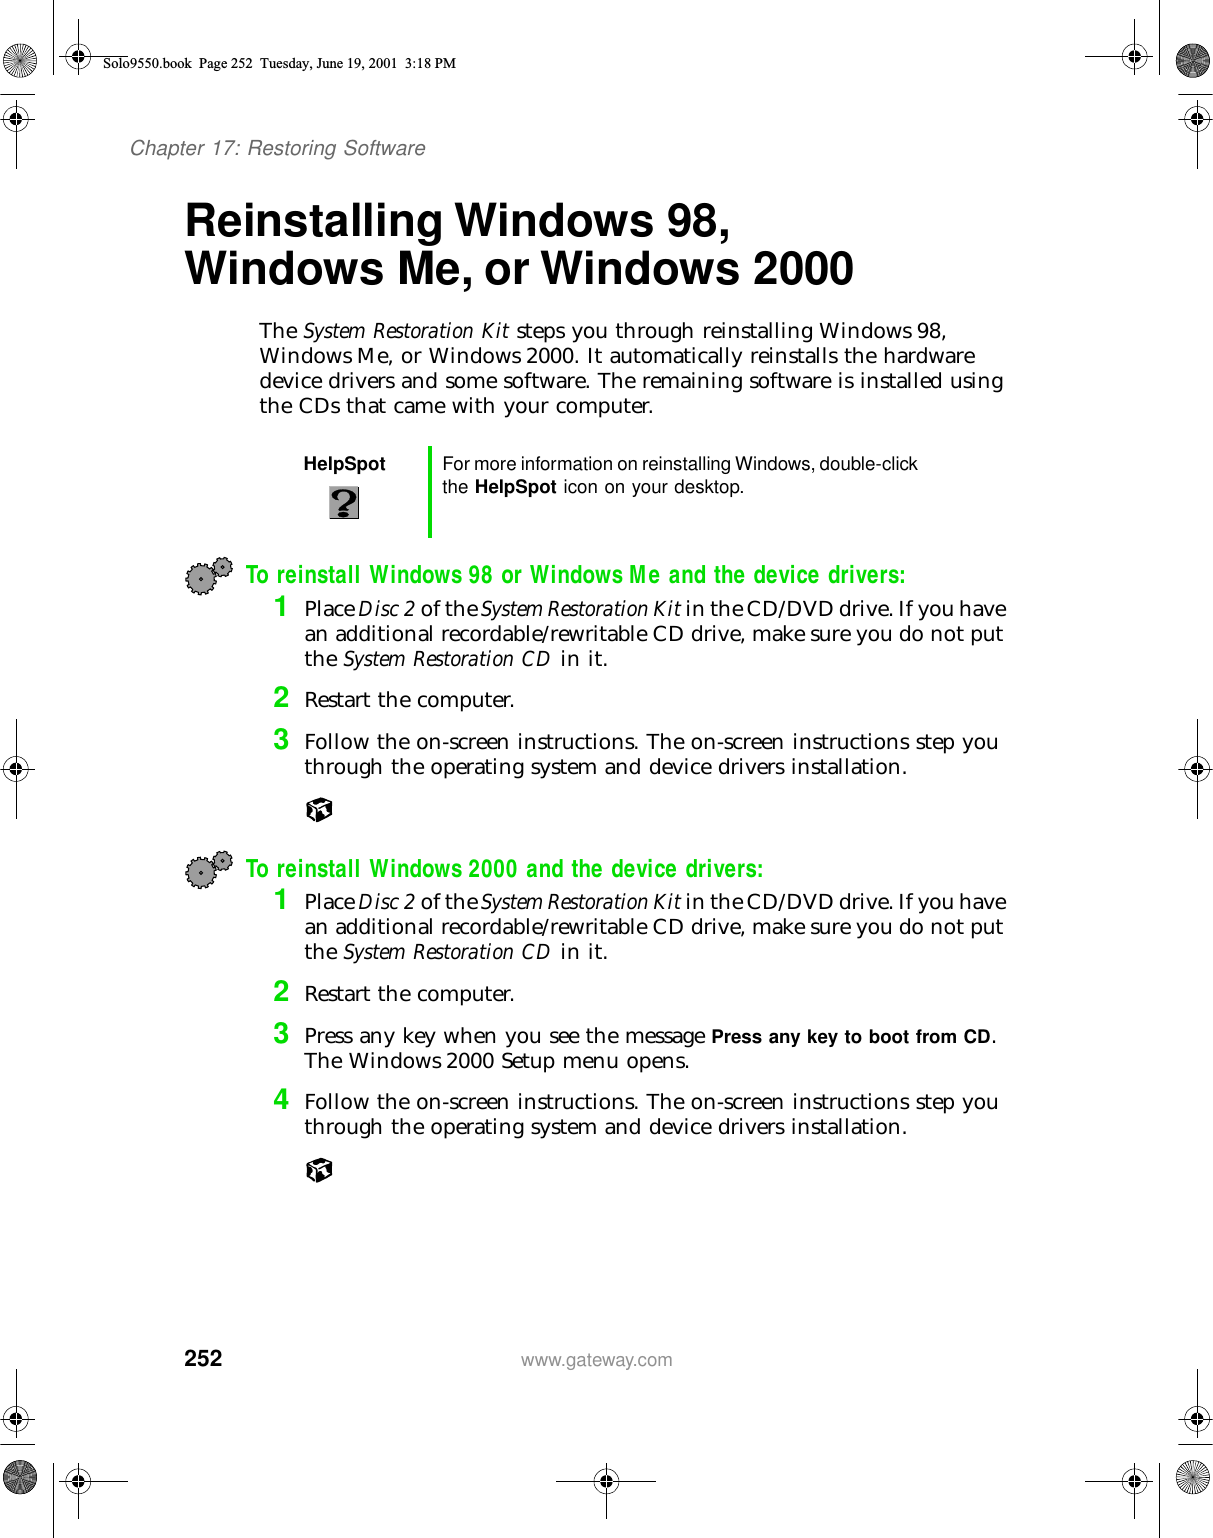 252Chapter 17: Restoring Softwarewww.gateway.comReinstalling Windows 98, Windows Me, or Windows 2000 The System Restoration Kit steps you through reinstalling Windows 98, Windows Me, or Windows 2000. It automatically reinstalls the hardware device drivers and some software. The remaining software is installed using the CDs that came with your computer.To reinstall Windows 98 or Windows Me and the device drivers:1Place Disc 2 of the System Restoration Kit in the CD/DVD drive. If you have an additional recordable/rewritable CD drive, make sure you do not put the System Restoration CD in it.2Restart the computer.3Follow the on-screen instructions. The on-screen instructions step you through the operating system and device drivers installation.To reinstall Windows 2000 and the device drivers:1Place Disc 2 of the System Restoration Kit in the CD/DVD drive. If you have an additional recordable/rewritable CD drive, make sure you do not put the System Restoration CD in it.2Restart the computer.3Press any key when you see the message Press any key to boot from CD. The Windows 2000 Setup menu opens.4Follow the on-screen instructions. The on-screen instructions step you through the operating system and device drivers installation.HelpSpot For more information on reinstalling Windows, double-click the HelpSpot icon on your desktop.Solo9550.book Page 252 Tuesday, June 19, 2001 3:18 PM